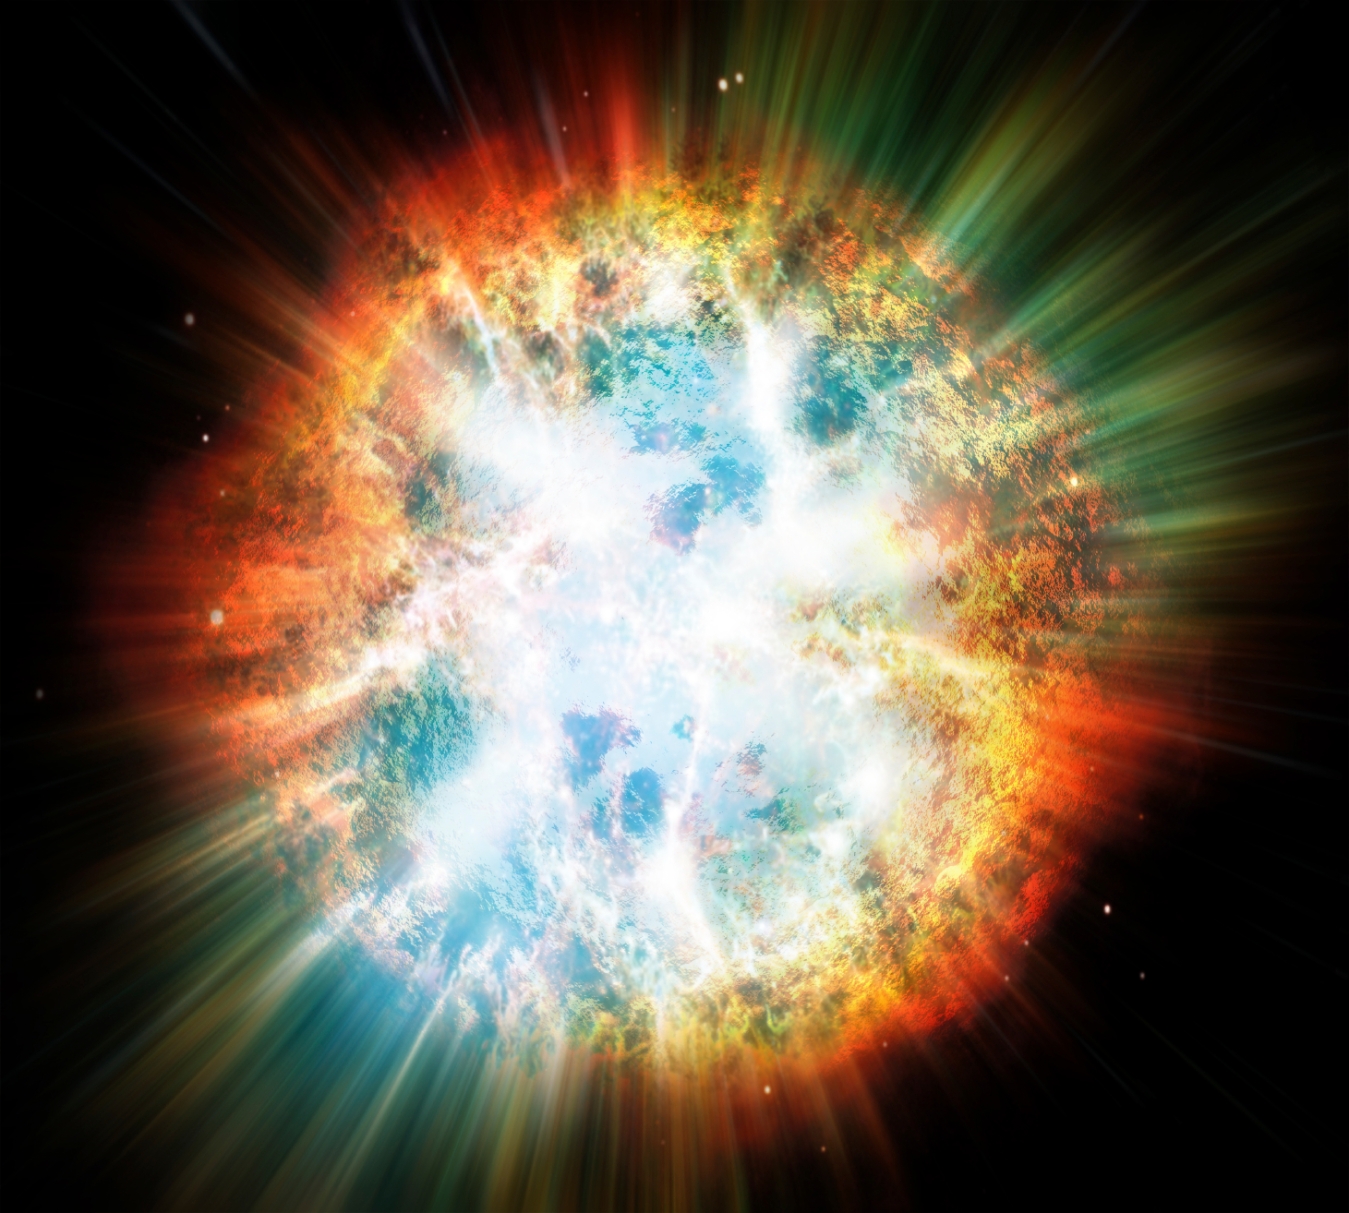 Explosion of planet or star